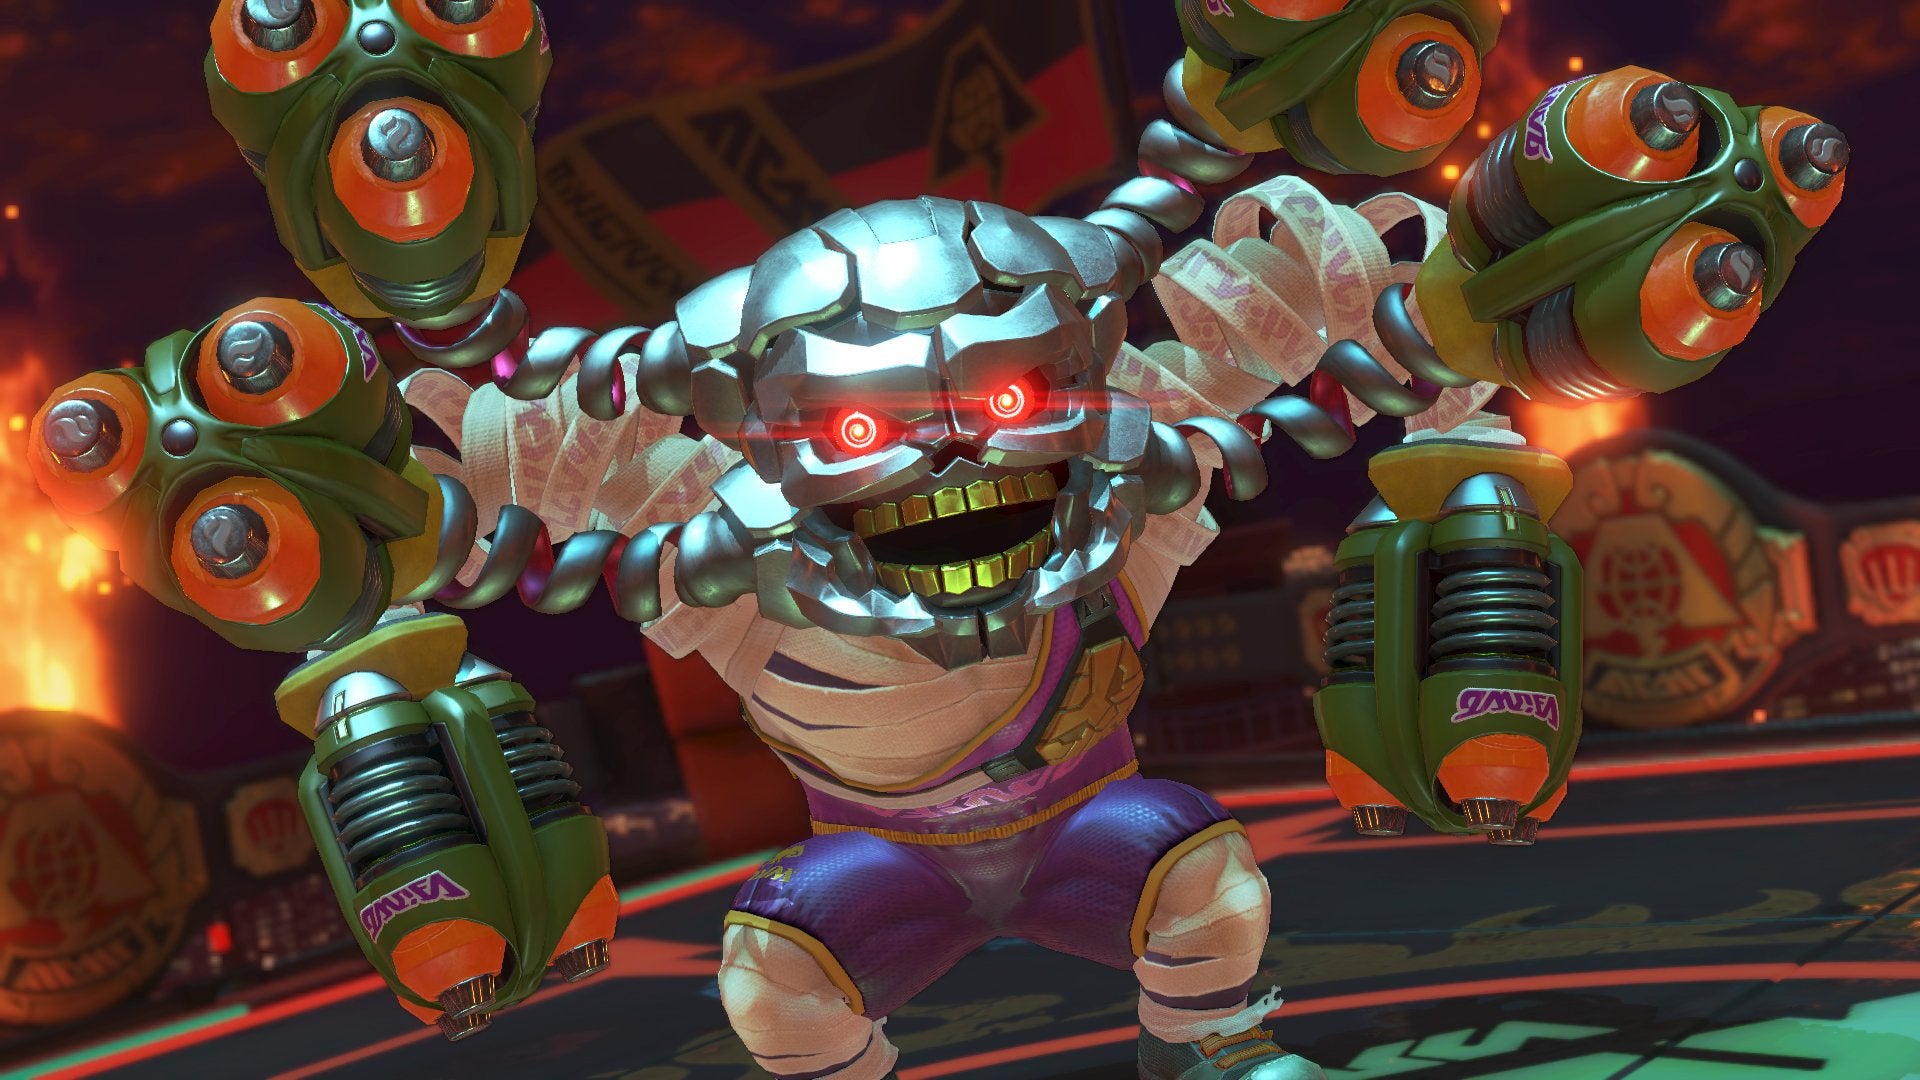 Image for Arms update includes Hedlok versus mode which turns one player into the formidable fighter